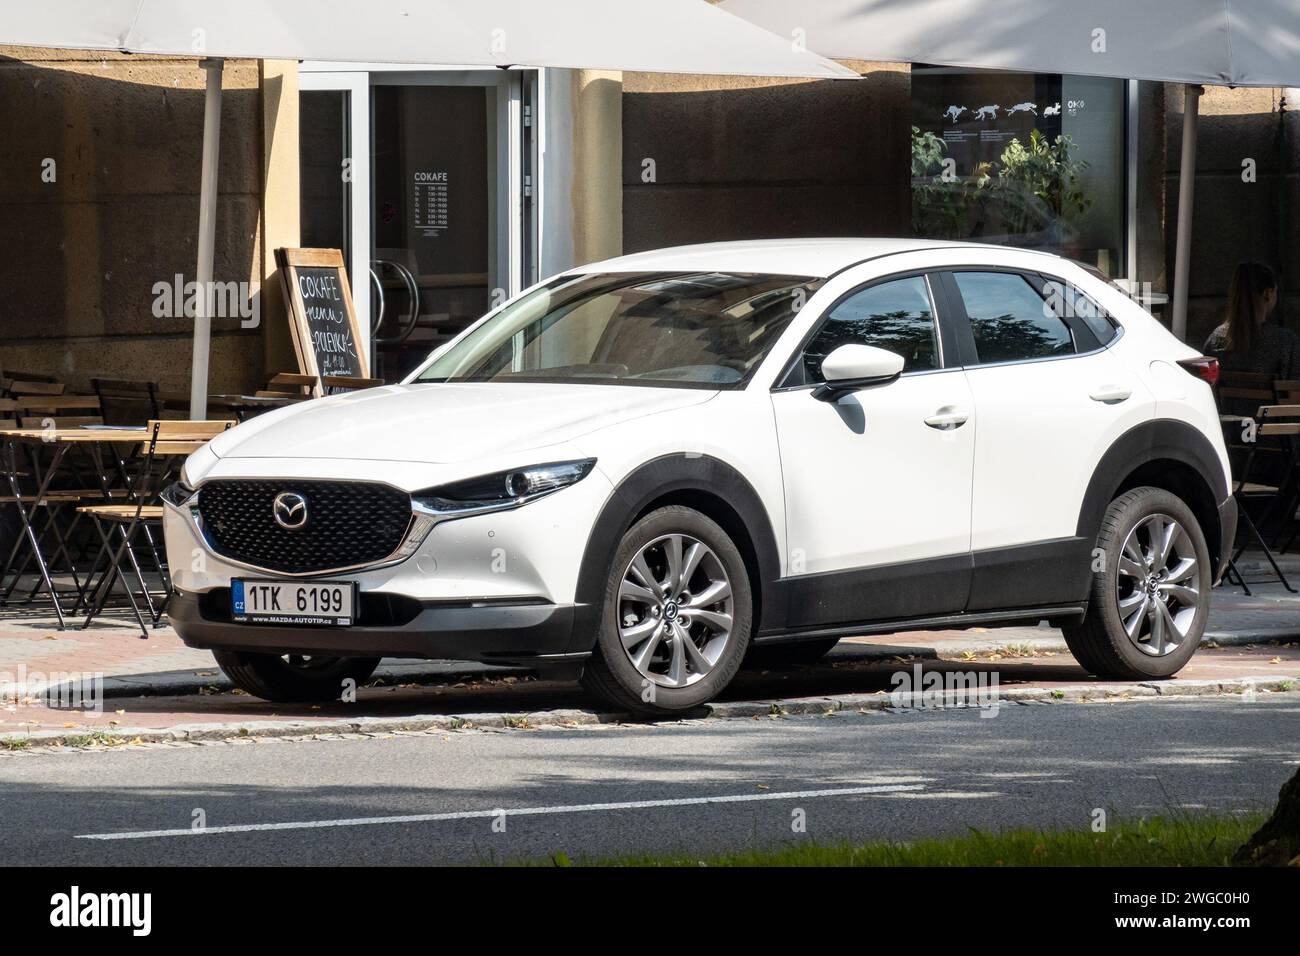 OSTRAVA, CZECH REPUBLIC - Mazda CX-30 compact crossover in white colour parking in front of restaurant Stock Photo